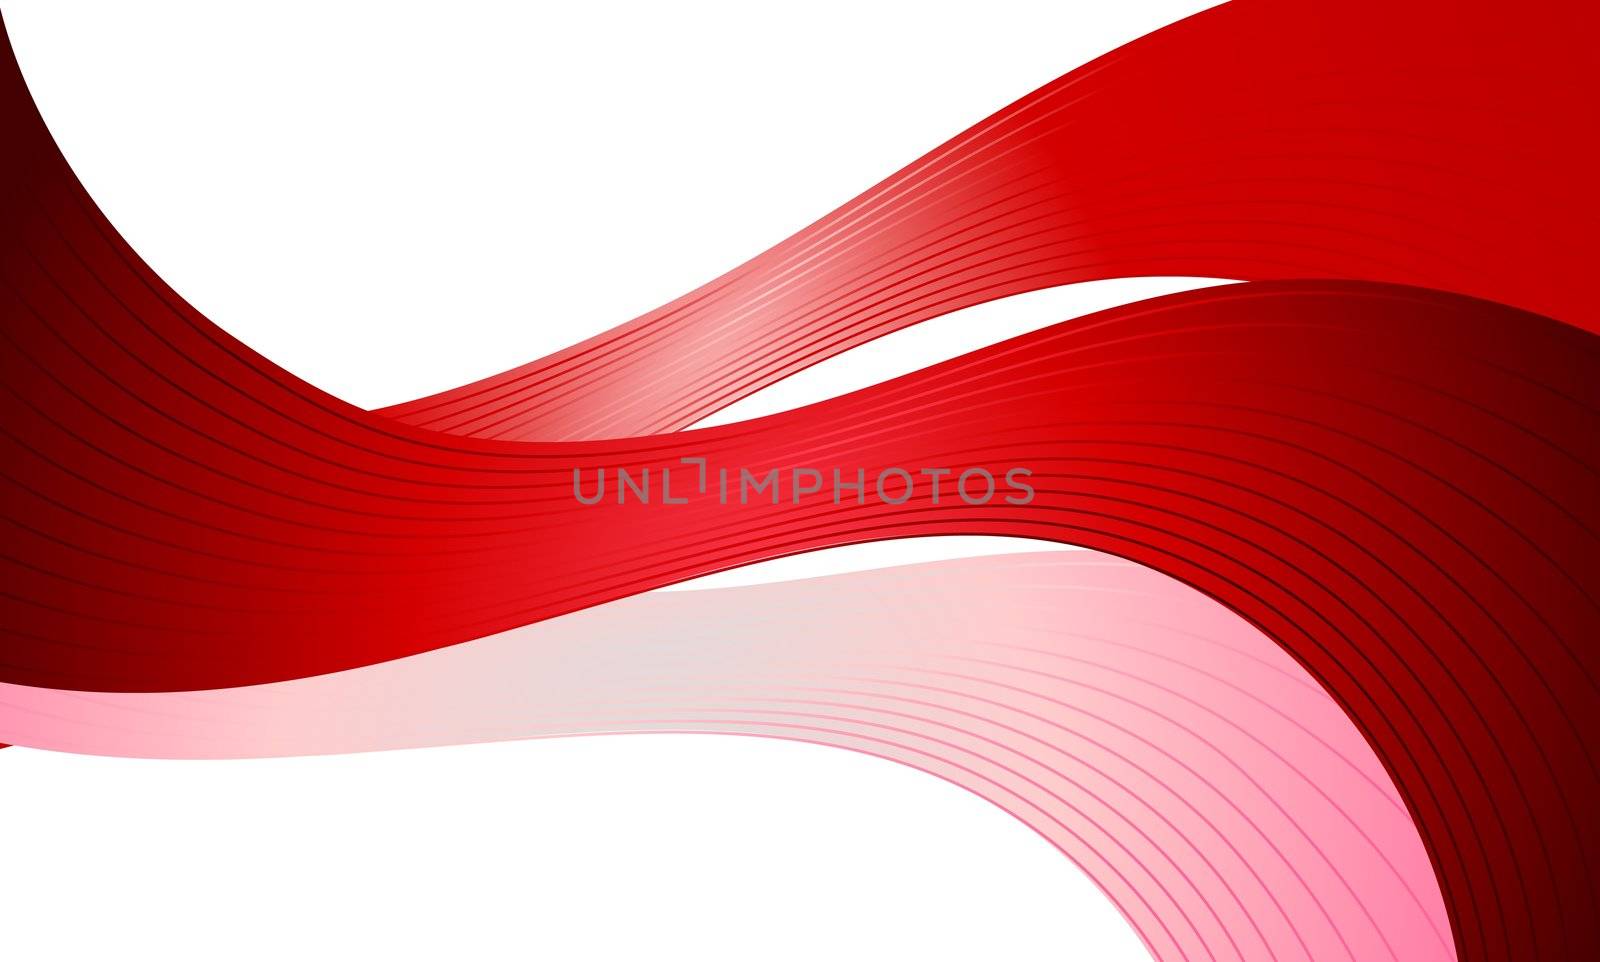 illustration of a abstract red wave background